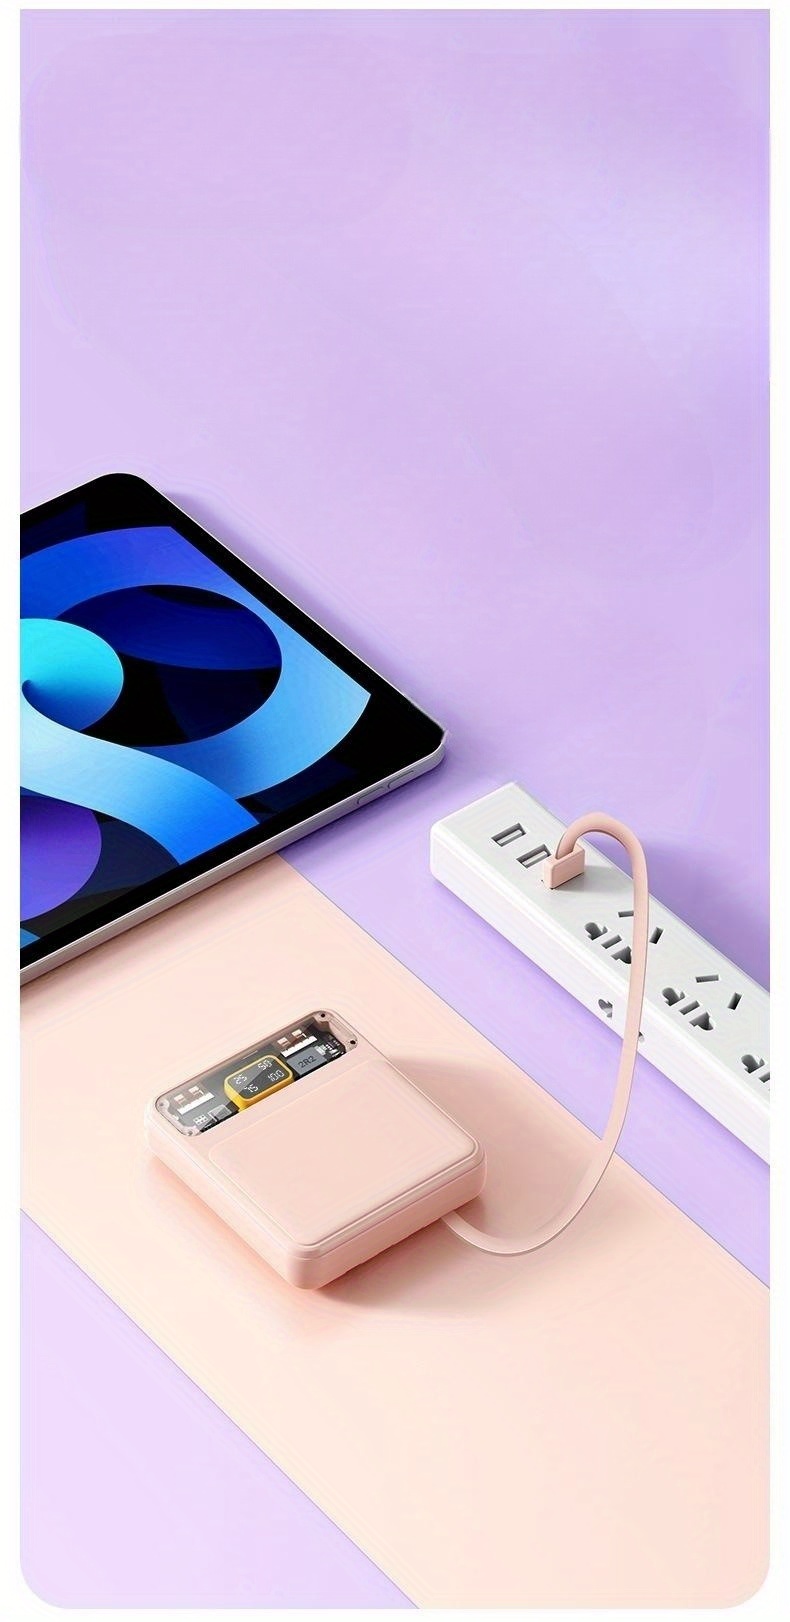 10000 mah power bank comes with 4 wires fast charging transparent mobile power supply for iphone samsung xiaomi oppo intelligent devices details 2